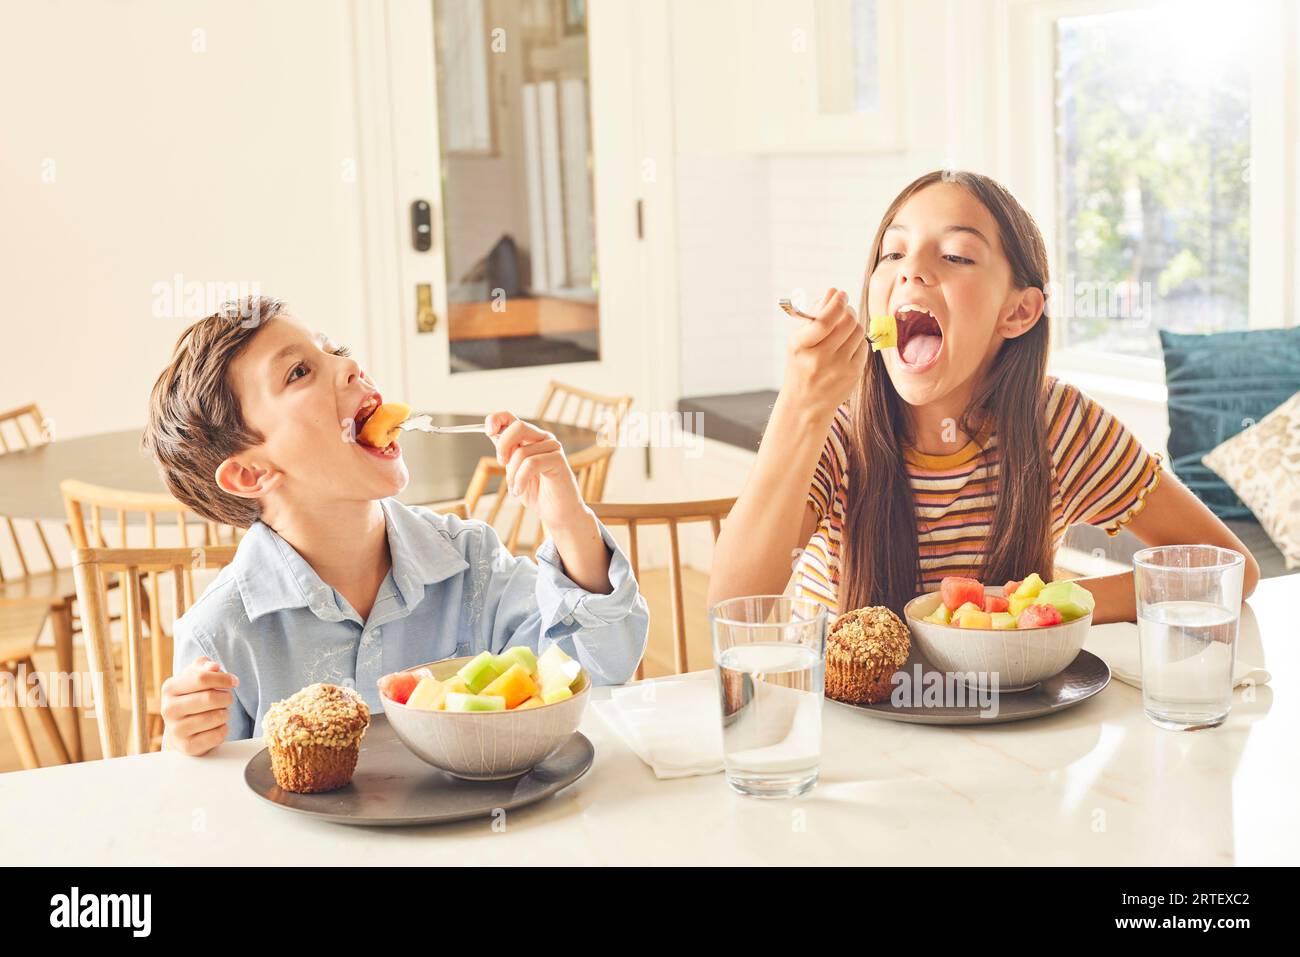 Boy (8-9) and girl (12-13) eating breakfast in kitchen Stock Photo